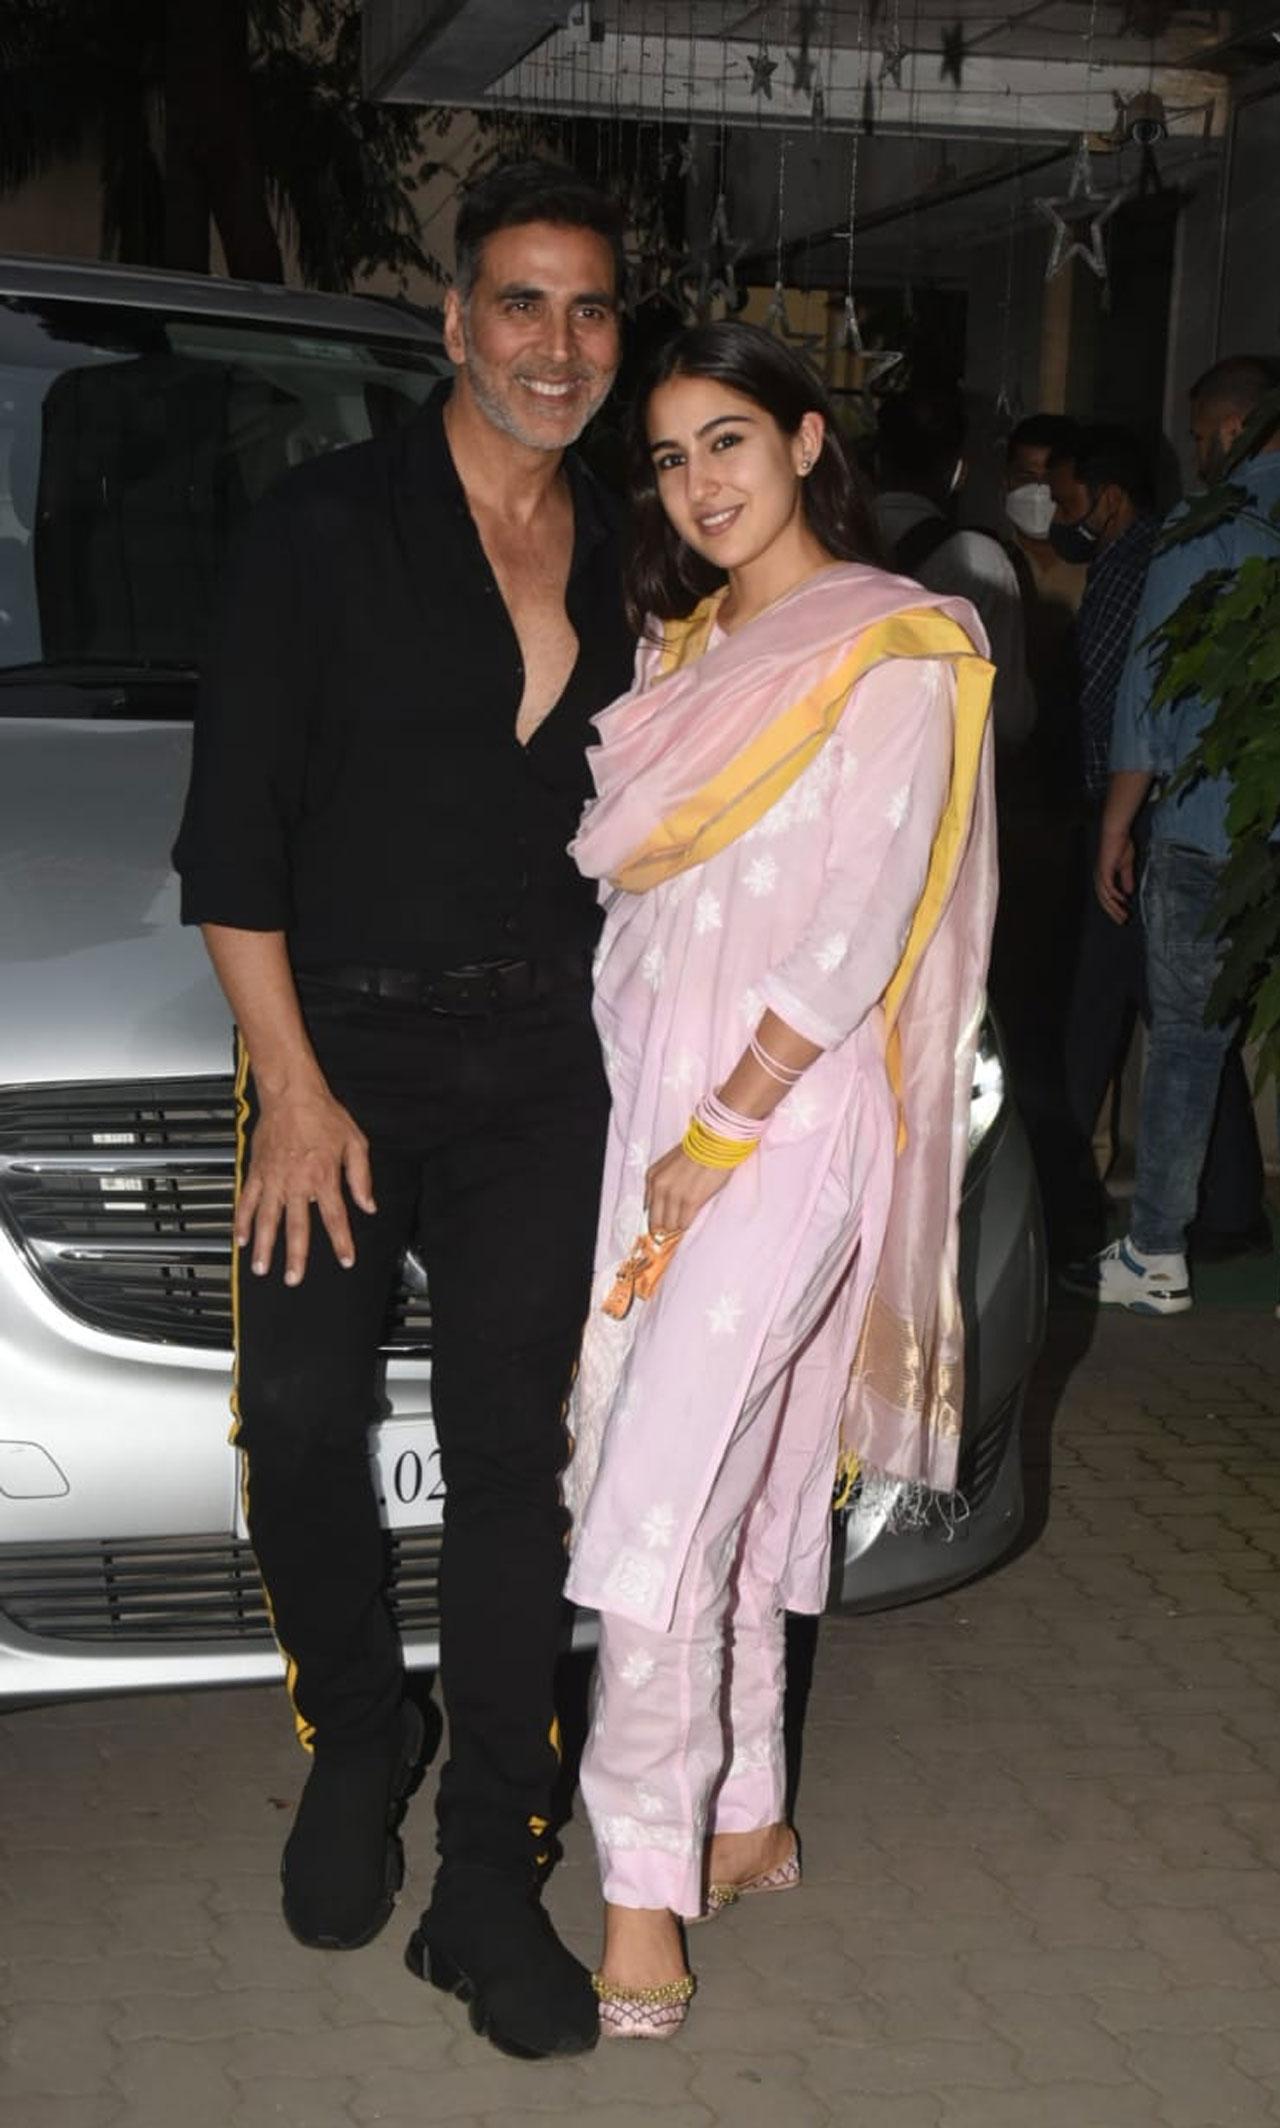 Akshay Kumar and Sara Ali Khan were also clicked together and let’s see how their chemistry clicks on celluloid. A report stated that this is going to be the most unique role of the Sooryavanshi star, something unexpected and unseen.